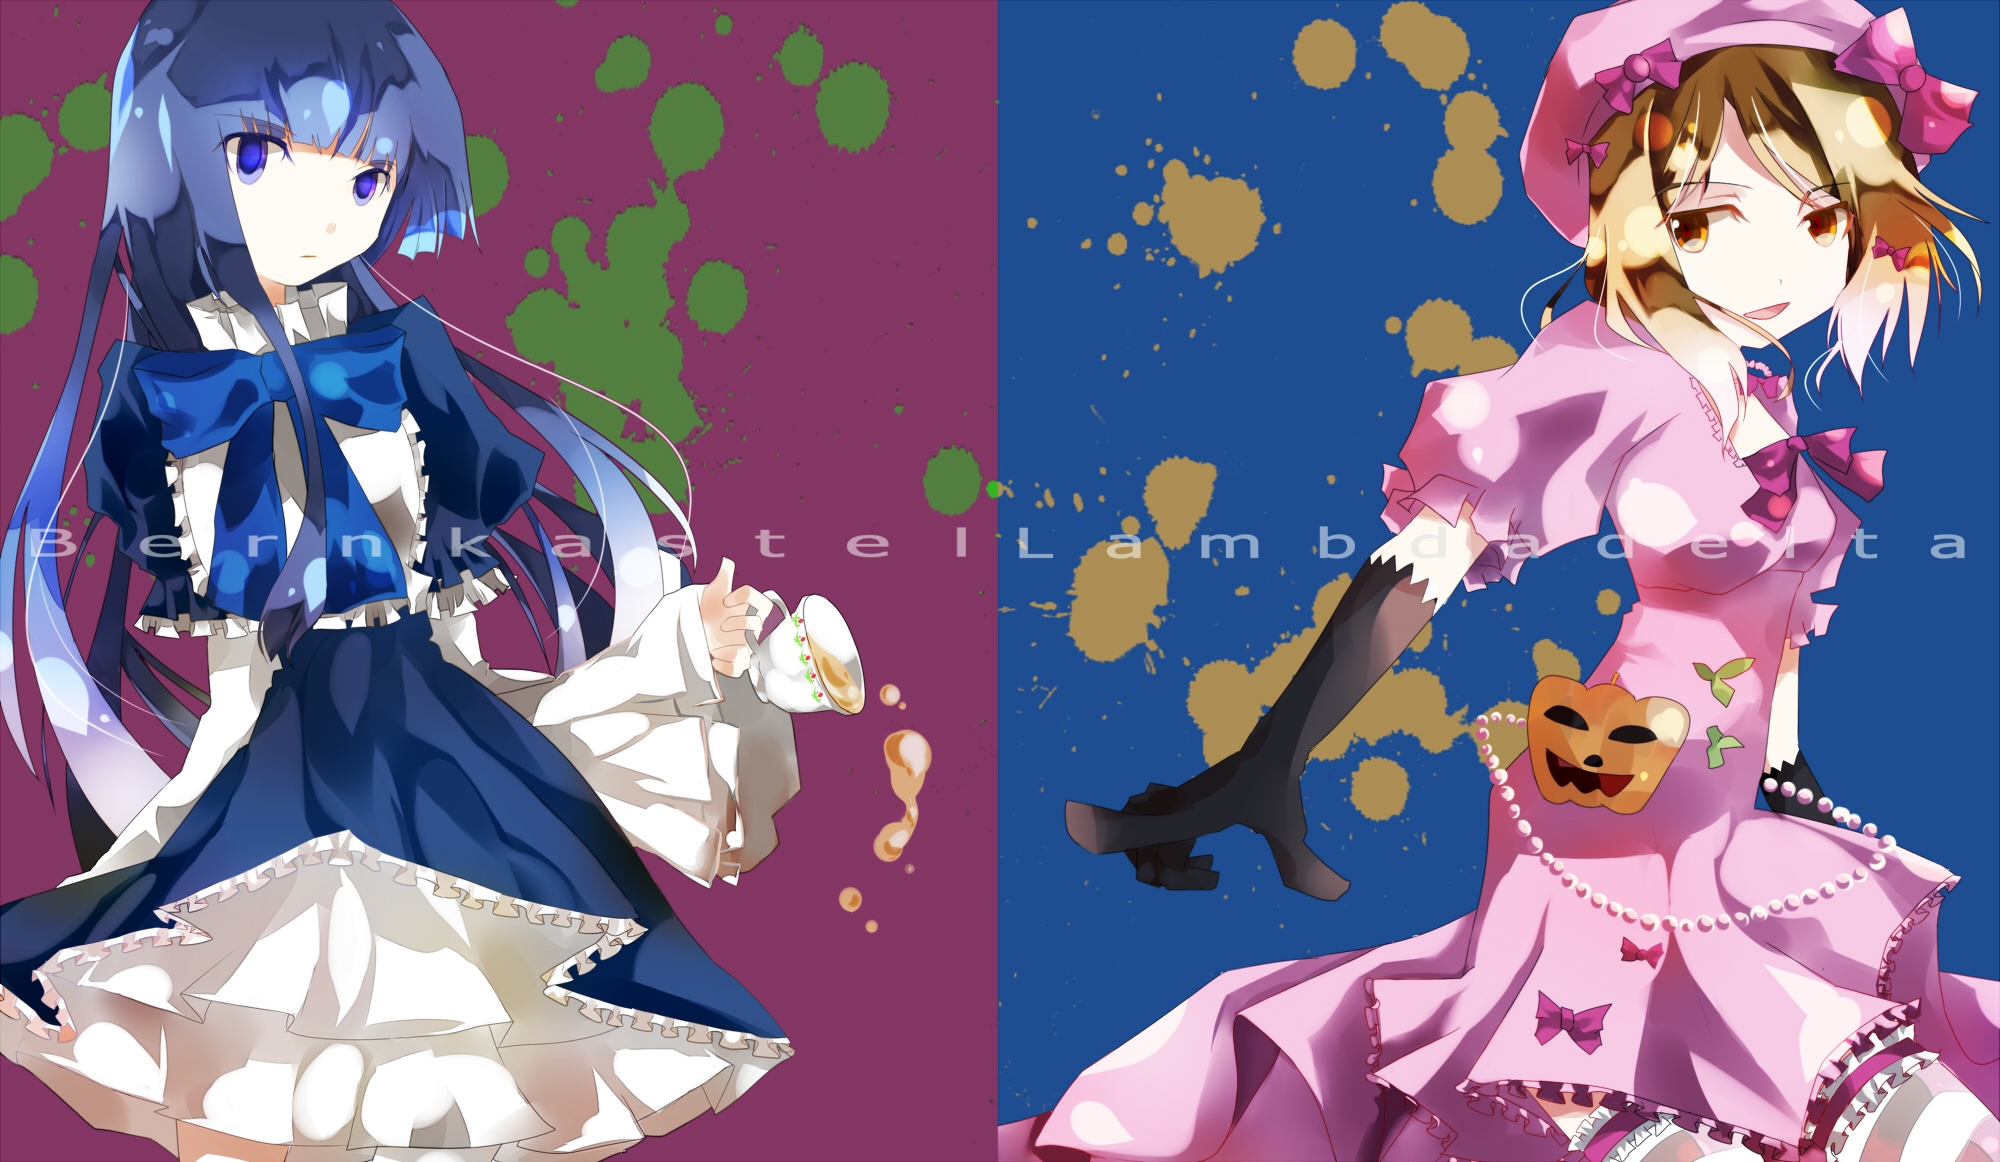 Anime Umineko: When They Cry HD Wallpaper by いとうみなと